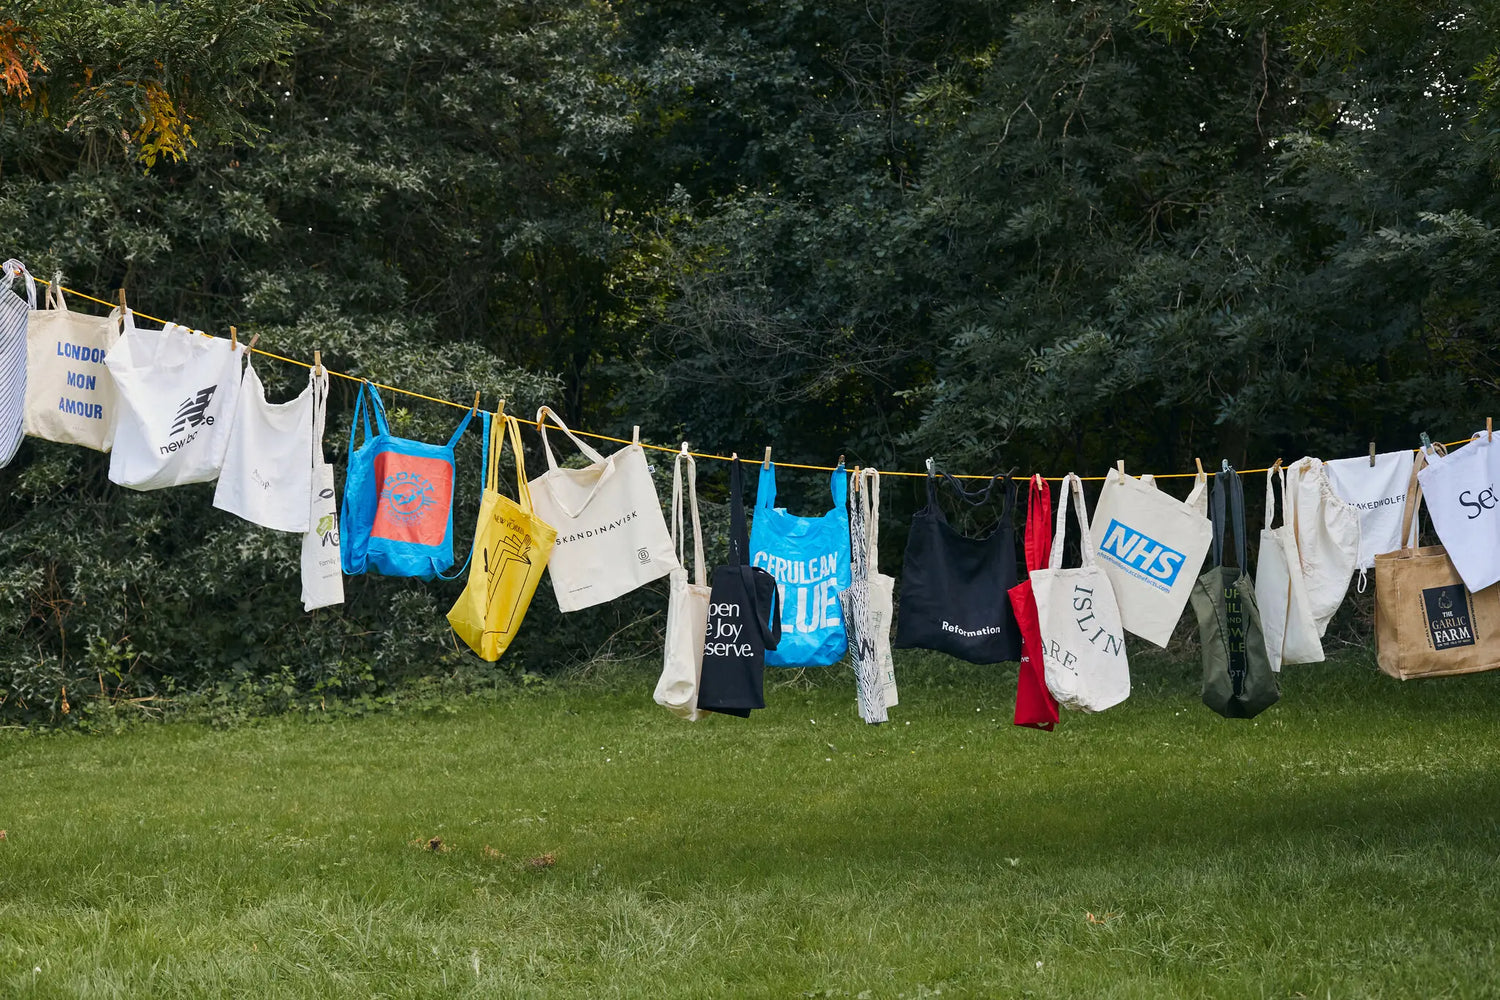 Is your tote bag toteally sustainable?